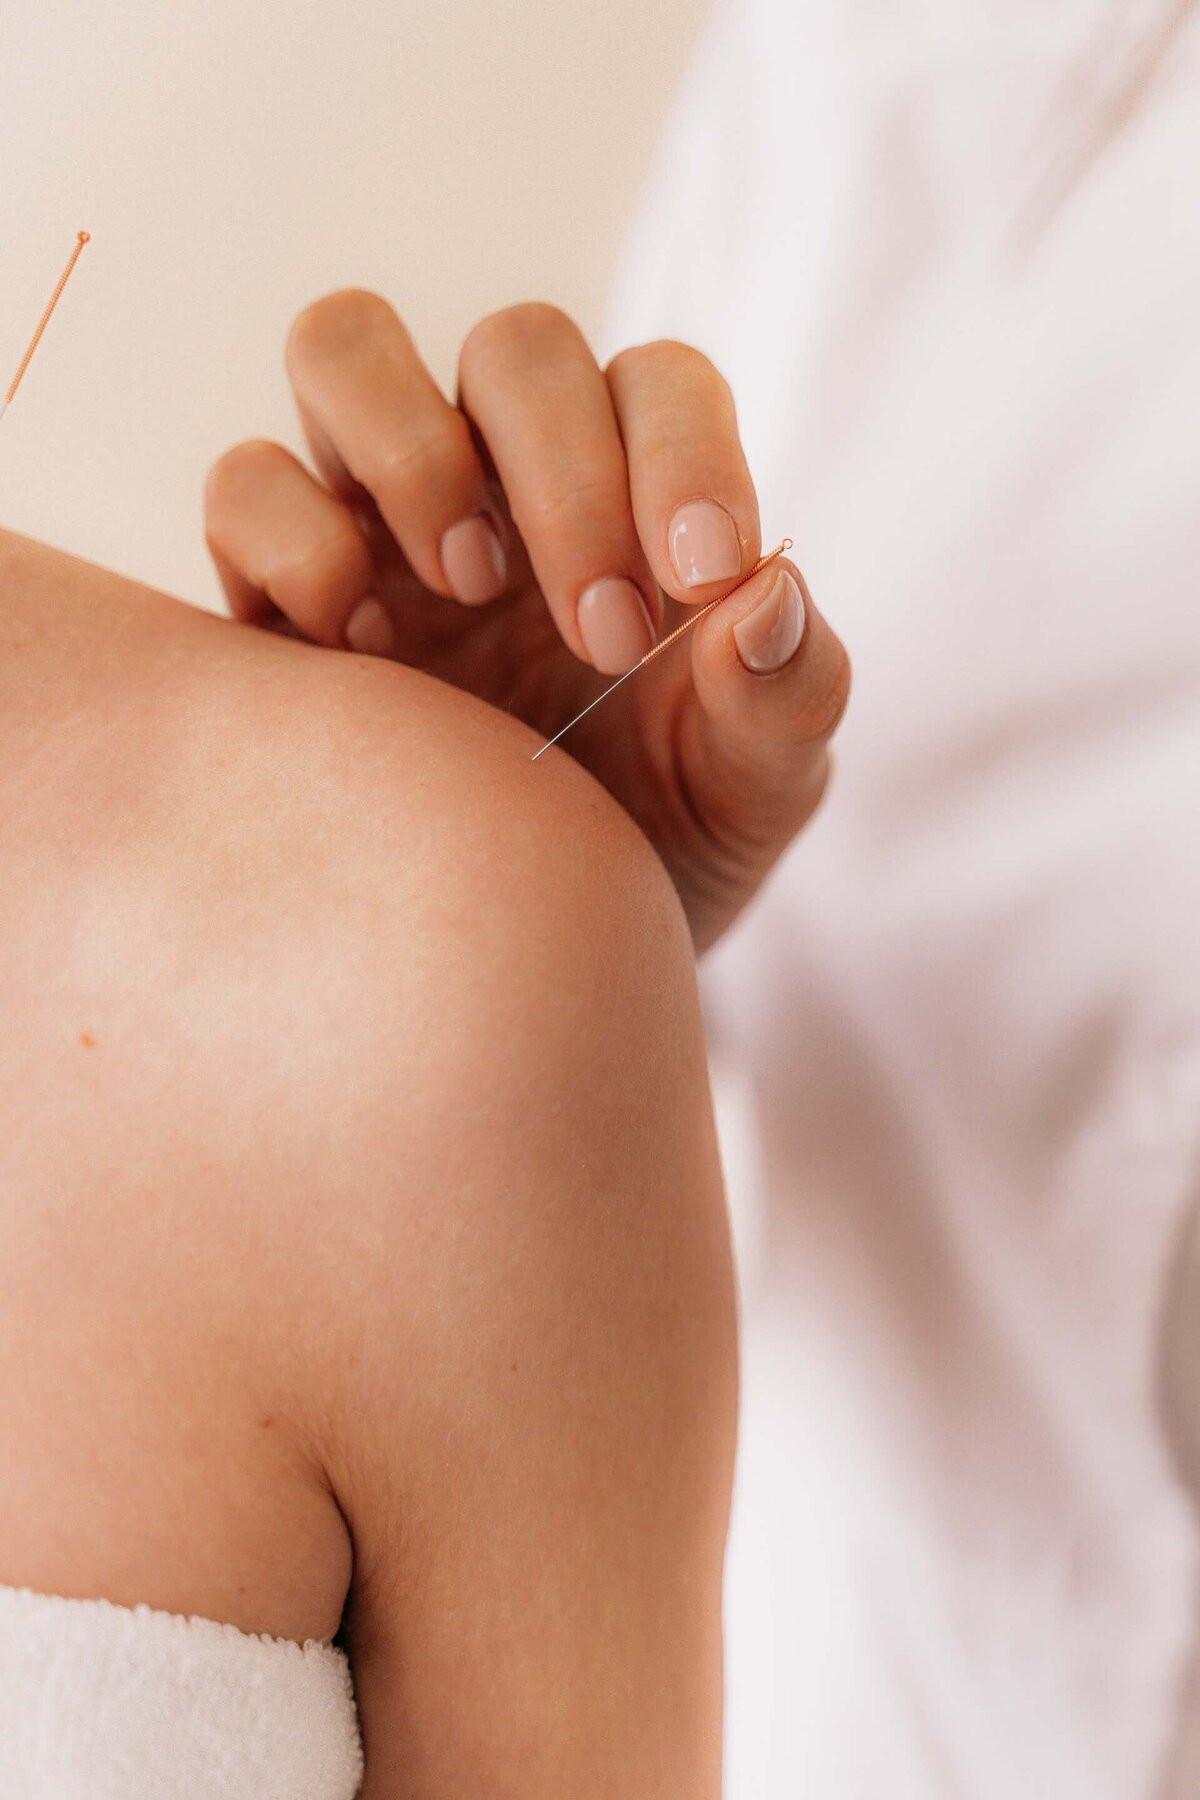 Acupuncture treatment in Fargo, ND